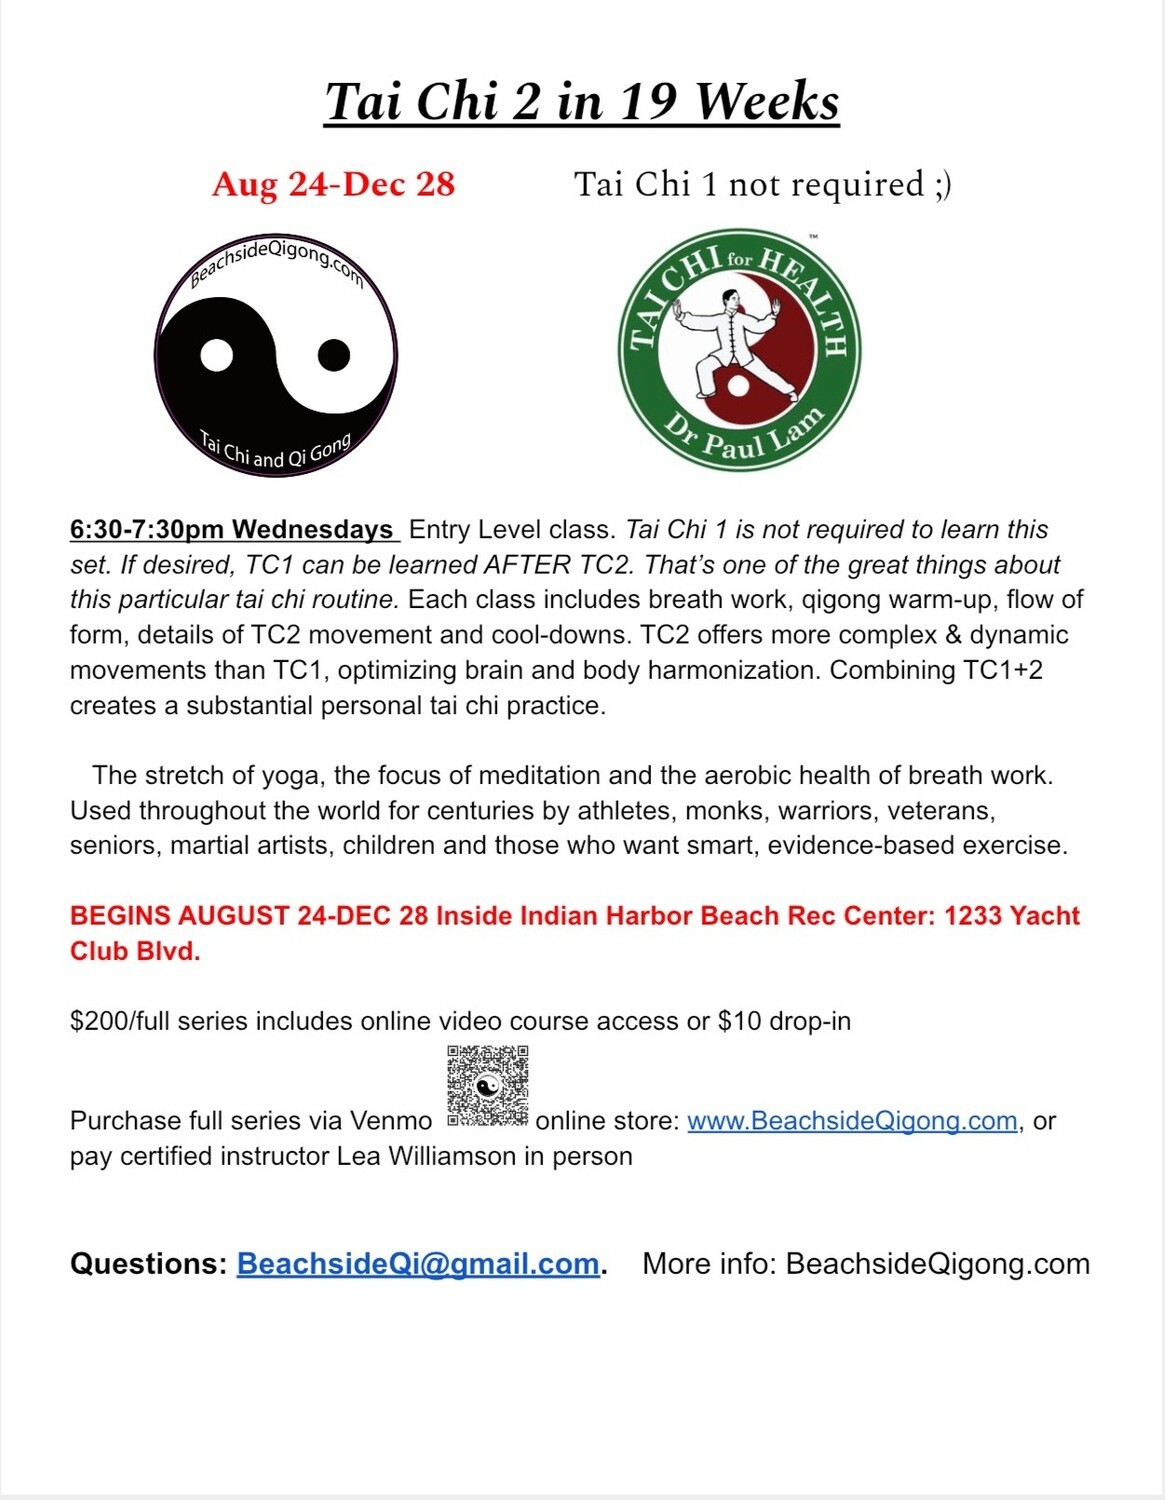 LIVE CLASS Tai Chi 2 in 19 Weeks - full series + online access